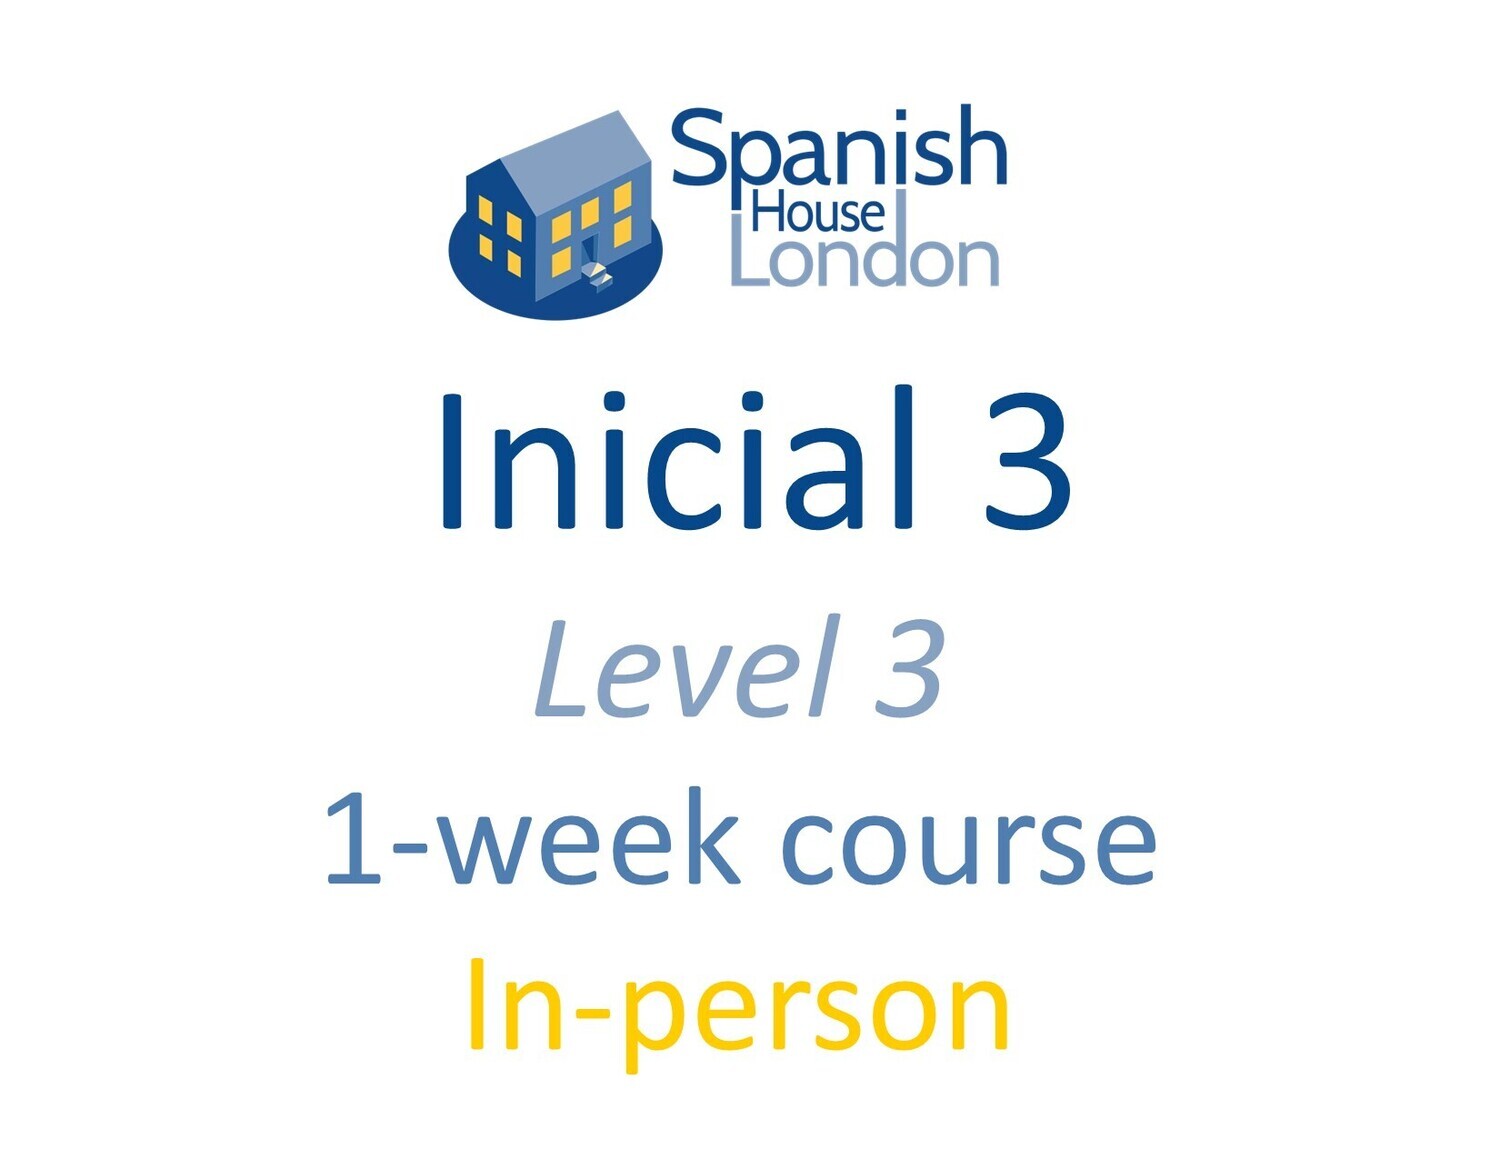 One-Week Intensive Inicial 3 Course starting on 20th November at 10.30am in Clapham North